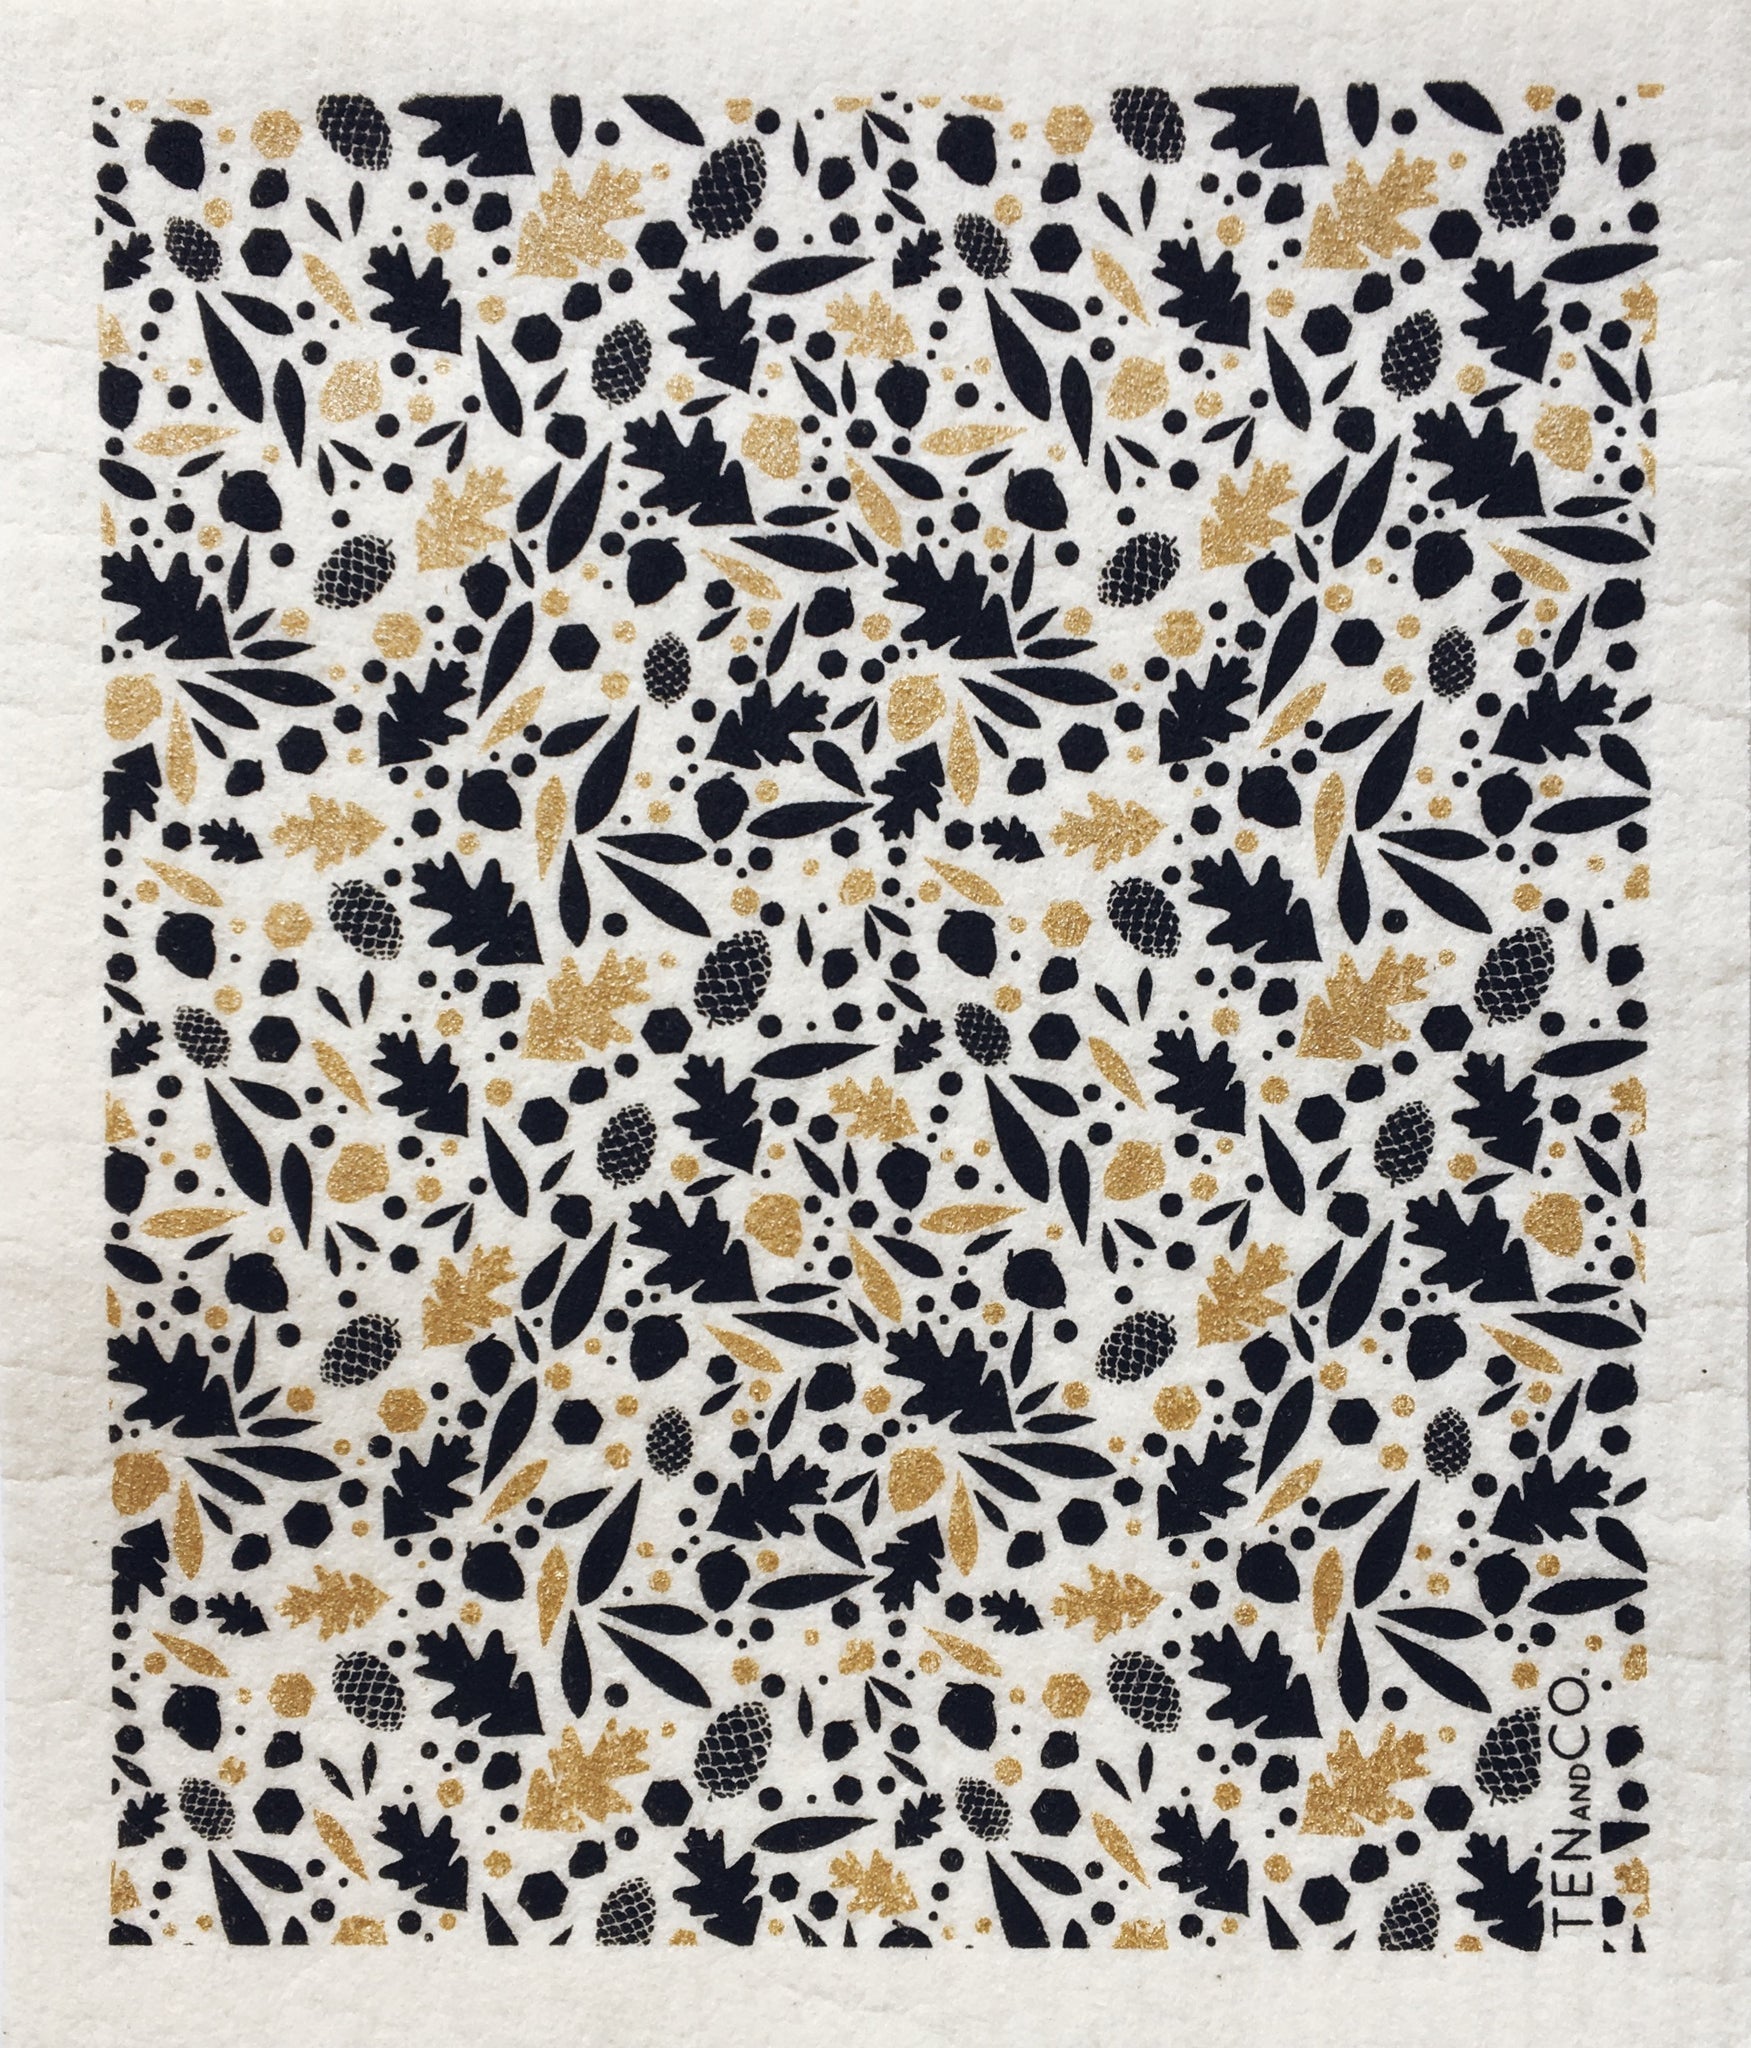 white tea towel with  gold and black oak leaves and acorns in a pattern covering the towel